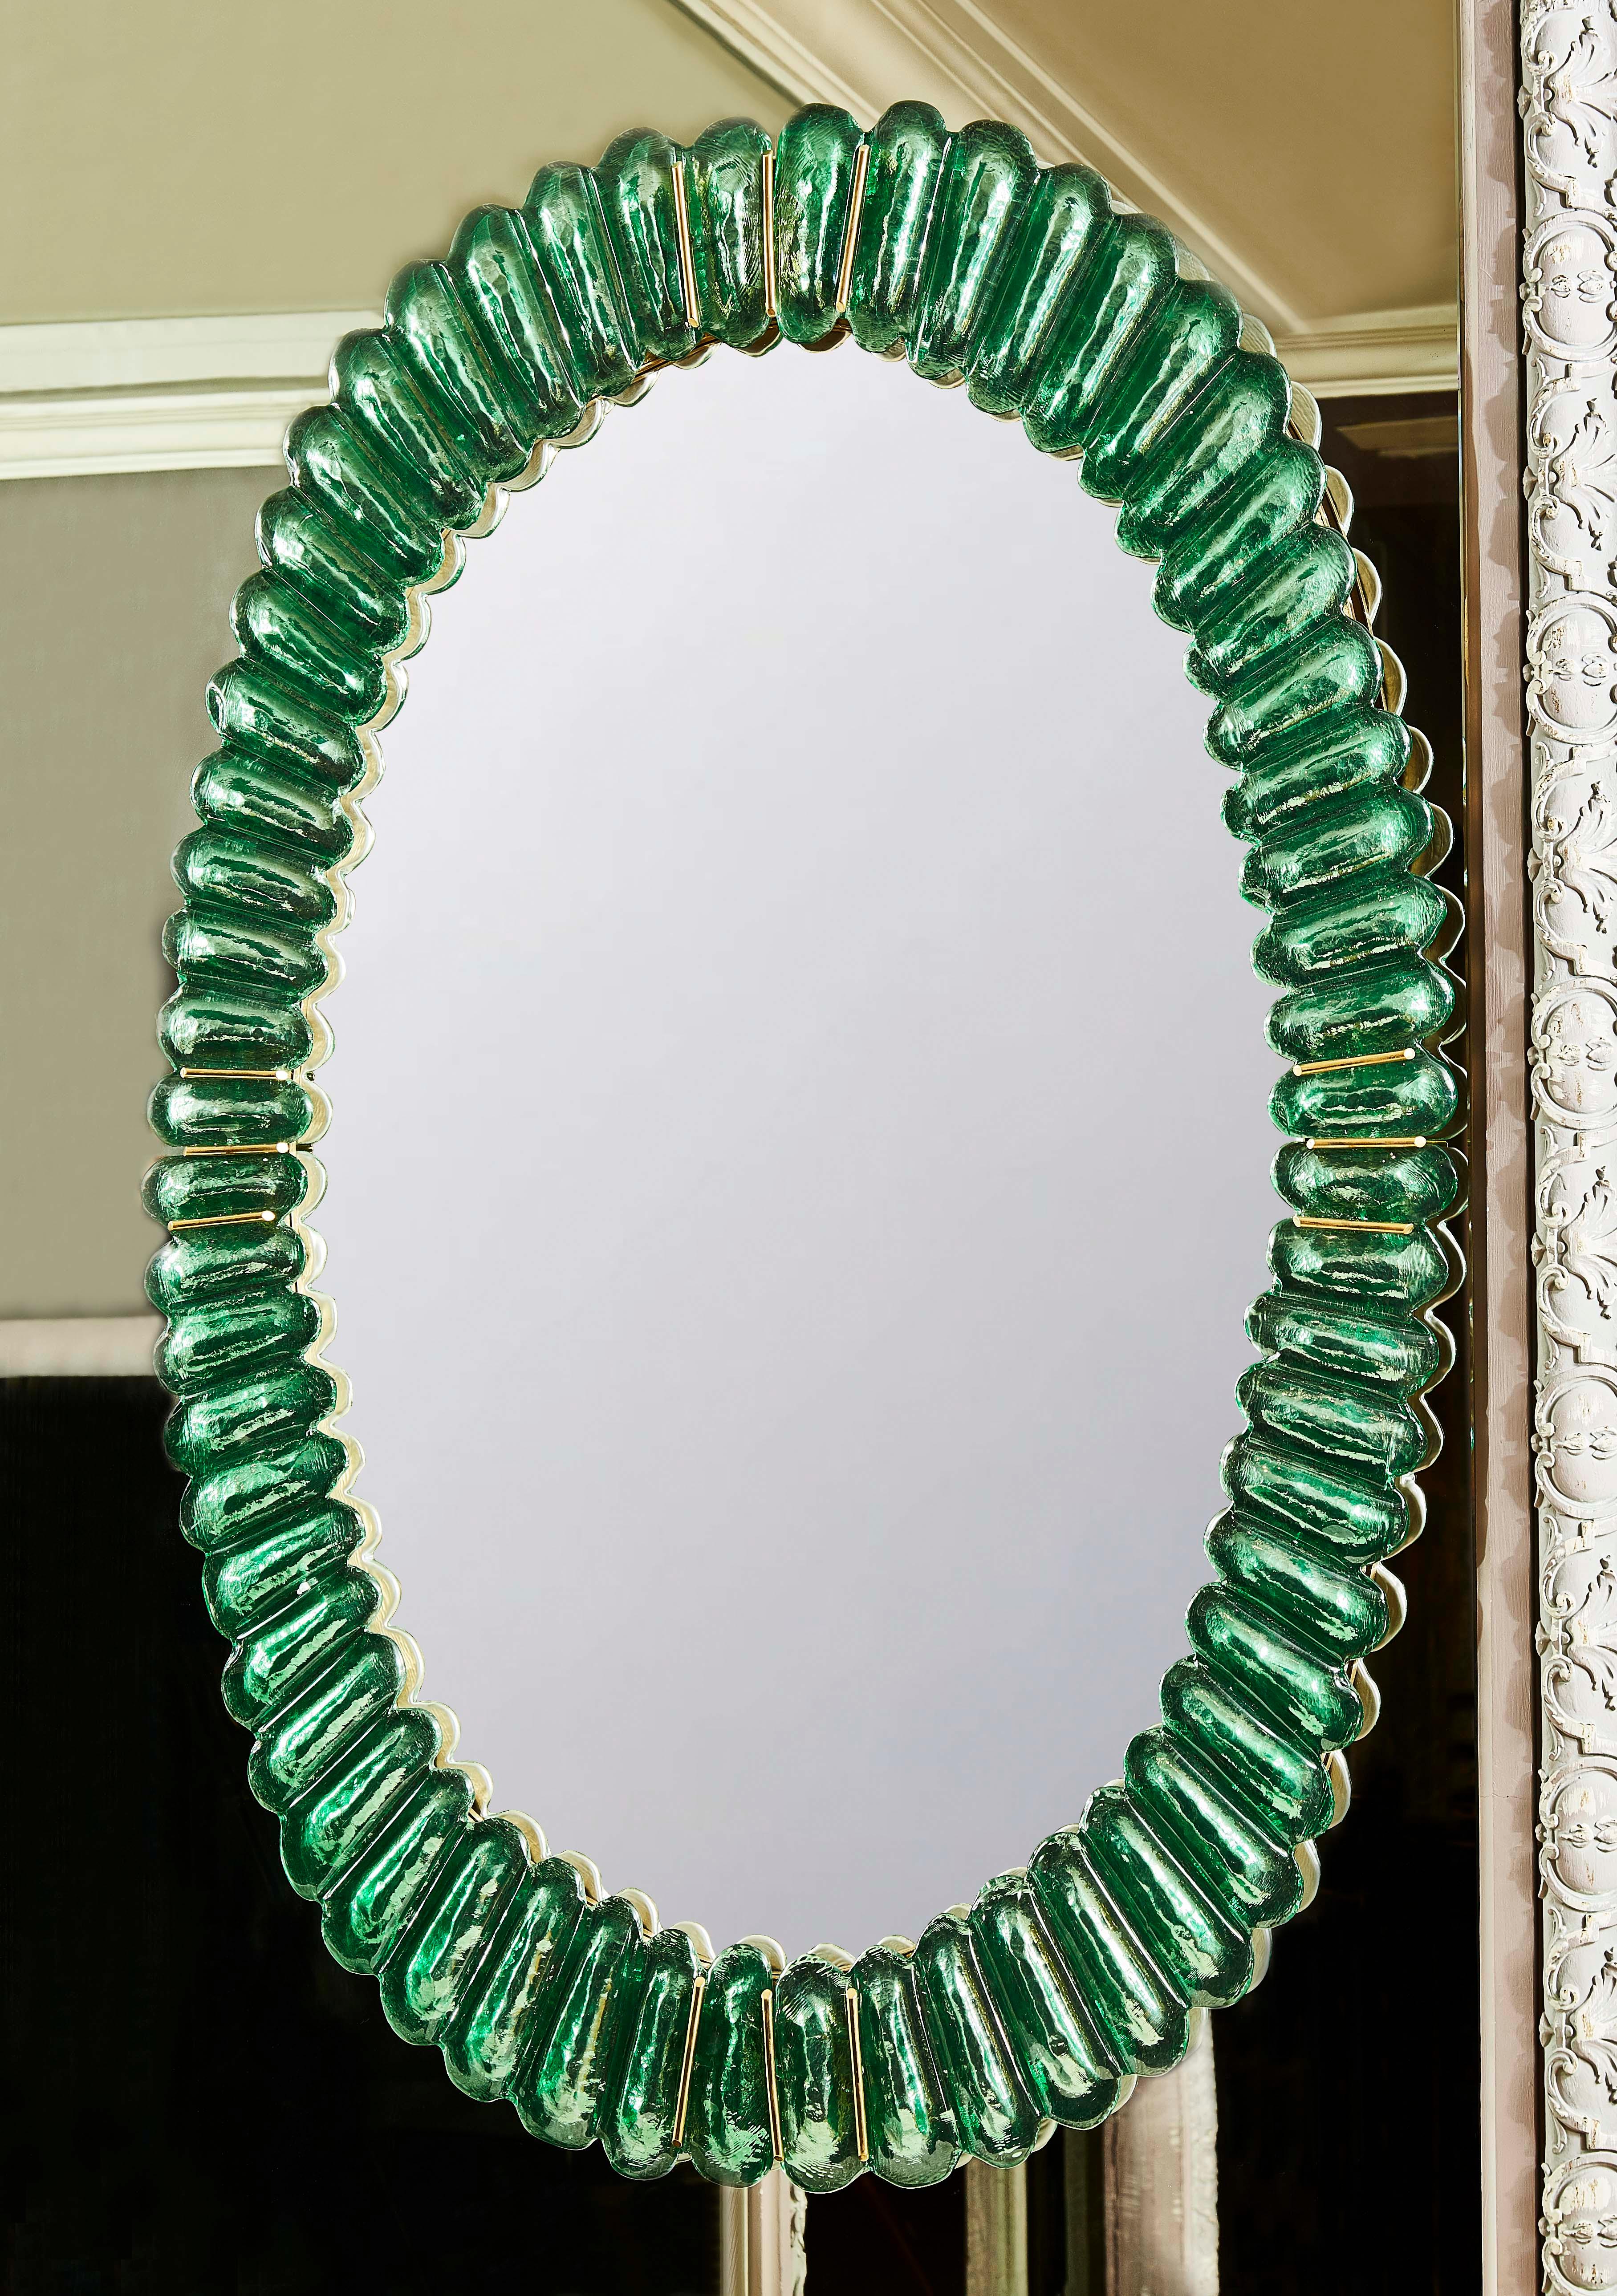 Pair of vintage oval mirrors made of green Murano glass and brass inlays.
Italy, 1970s style.